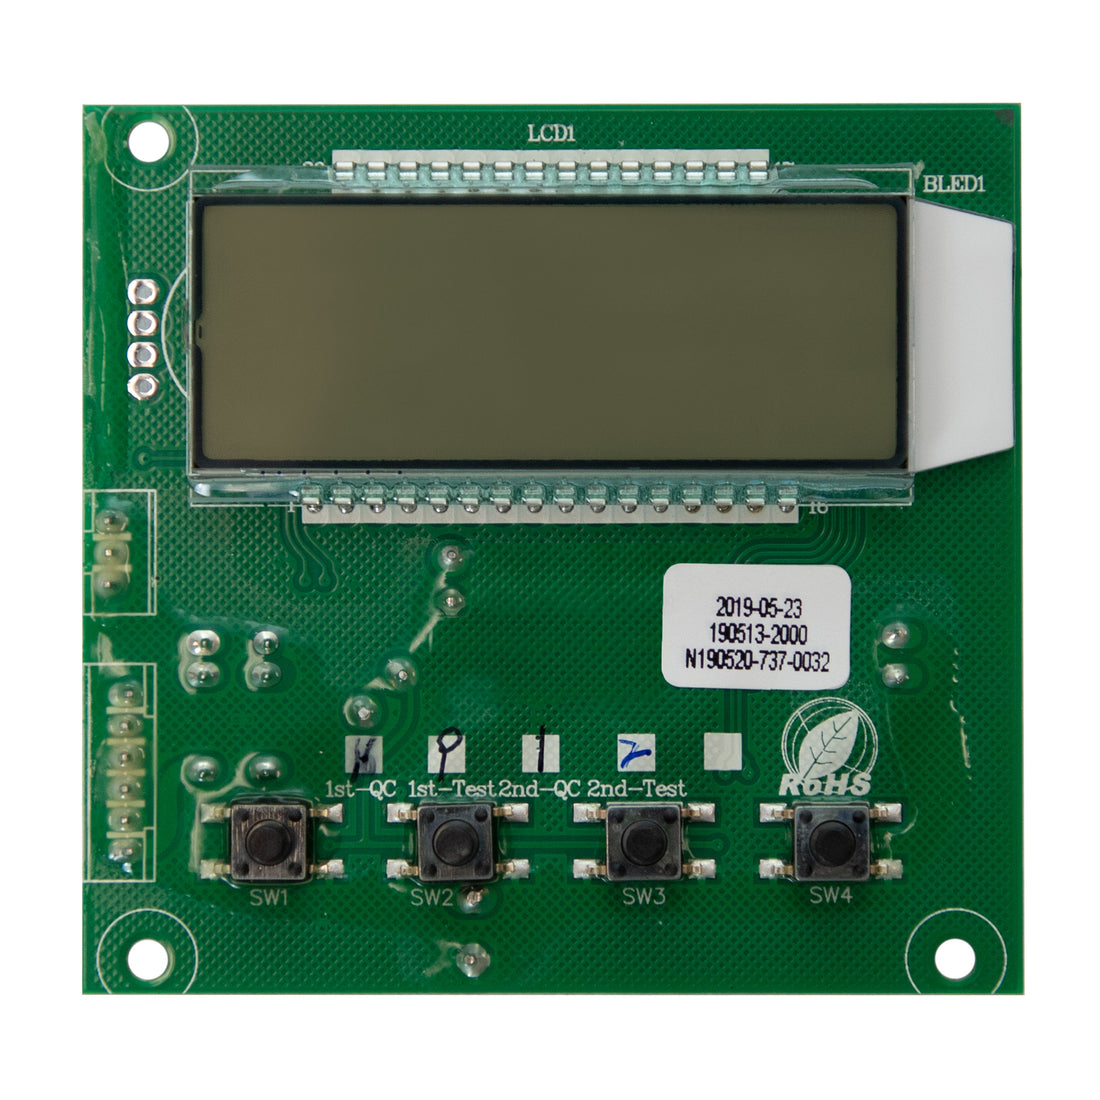 Electronic Printed Circuit Board with Digital Display for Harmony Series Water SoftenerElectronic Printed Circuit Board with Digital Display for Harmony Series Water Softener